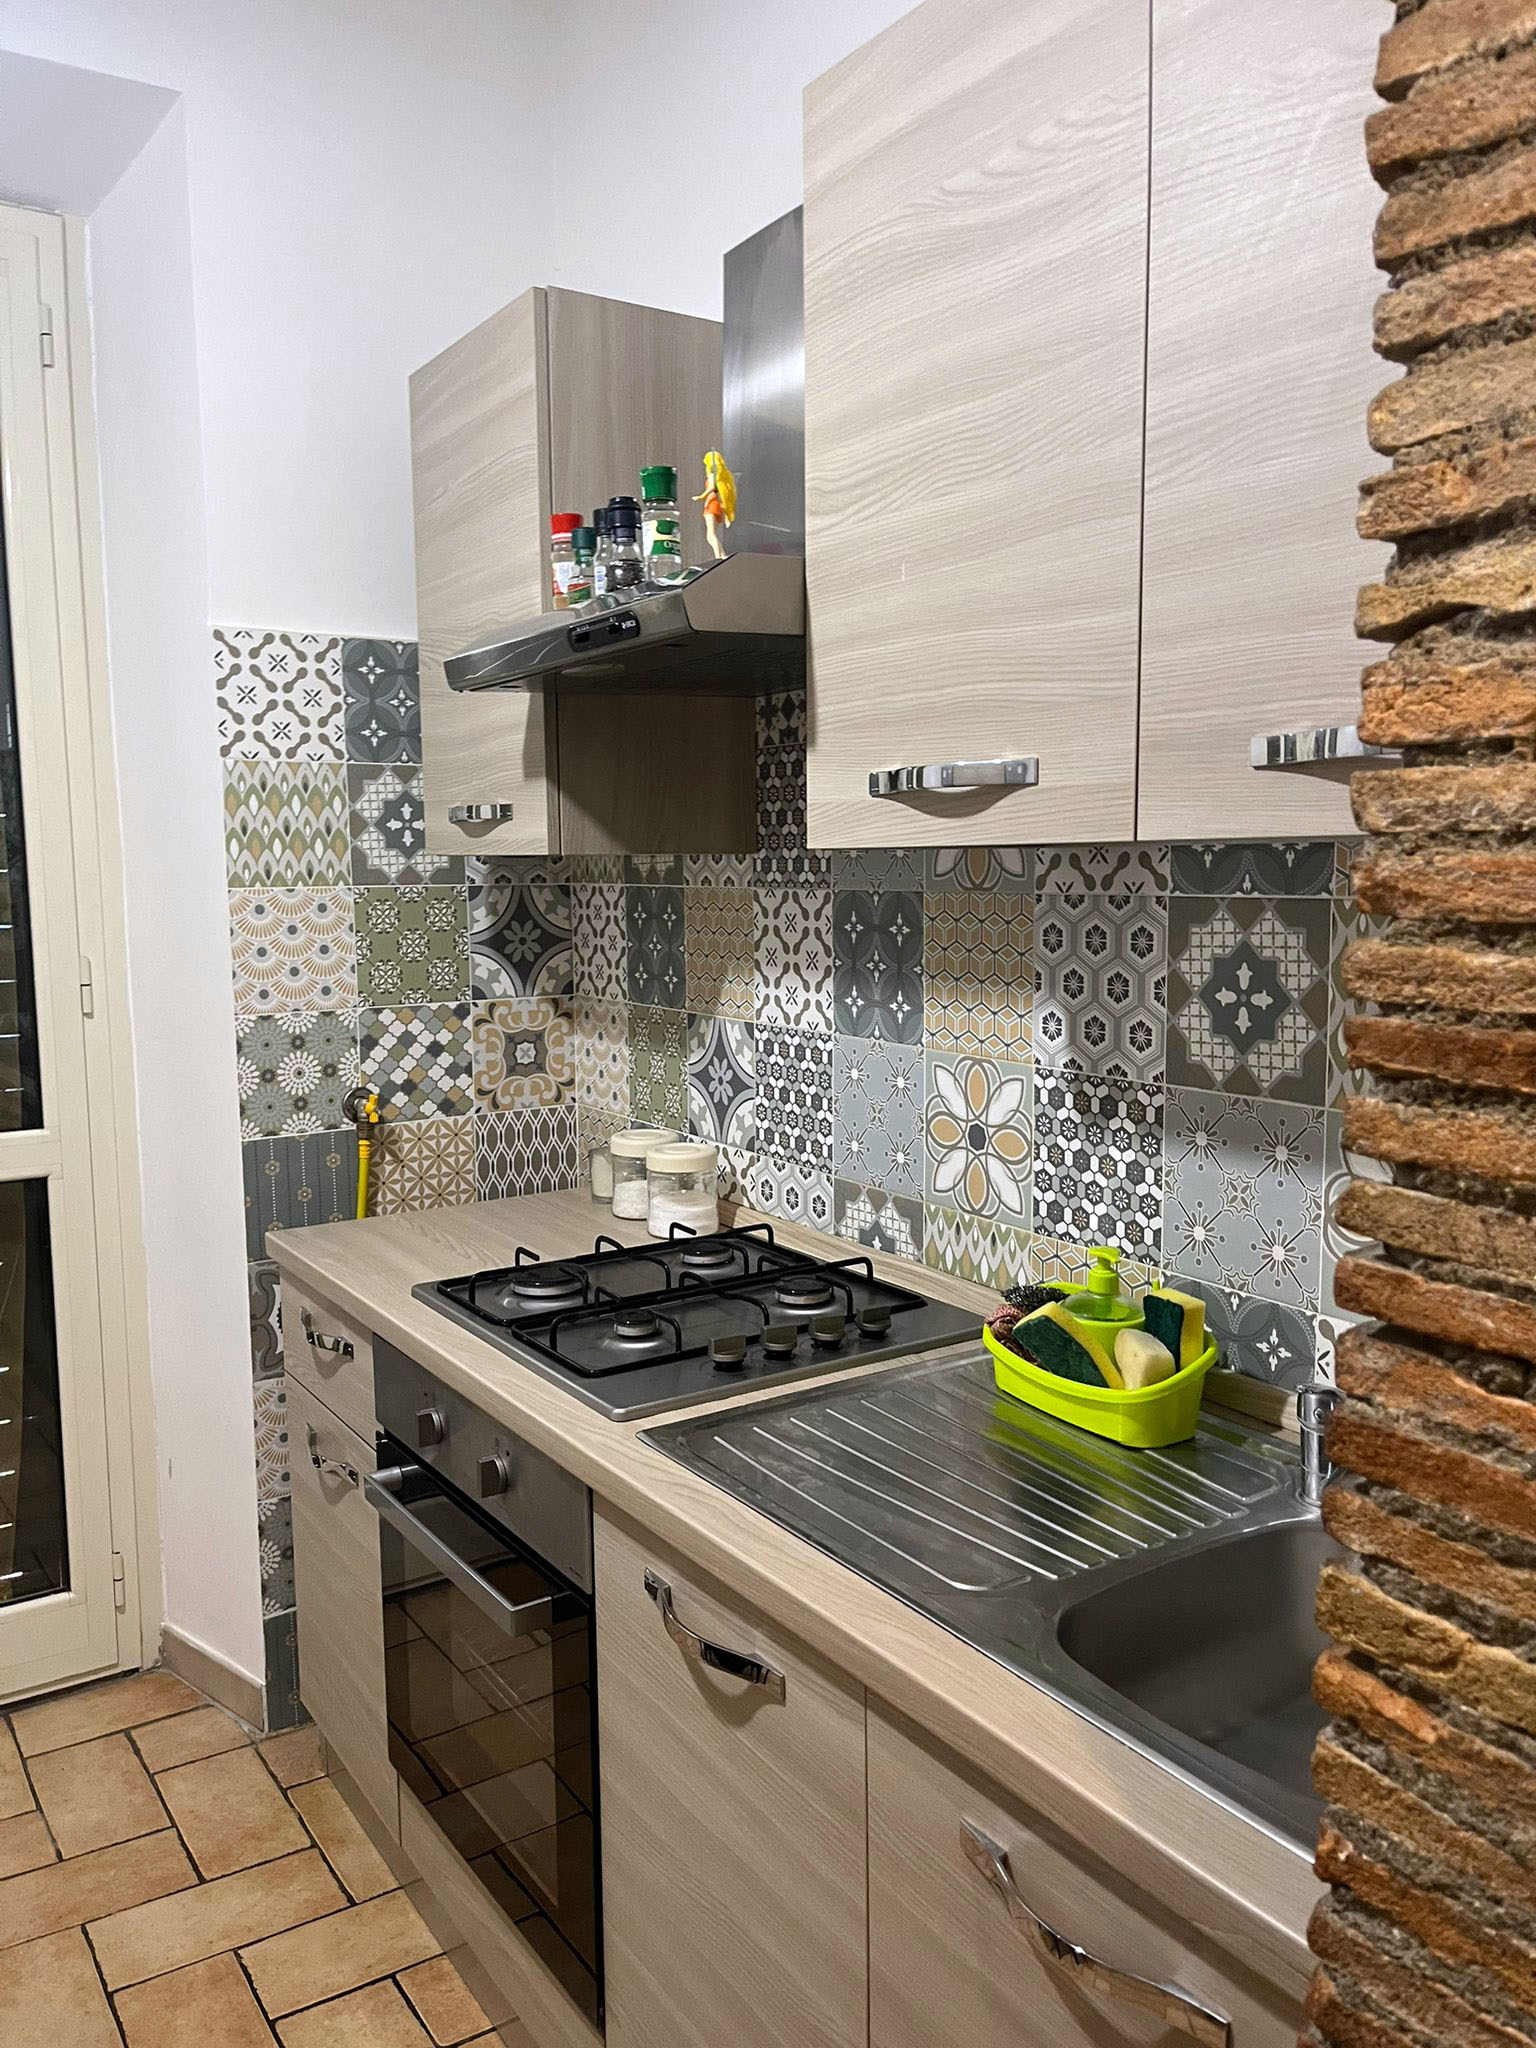 Kitchen in the student apartment housing in Viterbo, Italy.